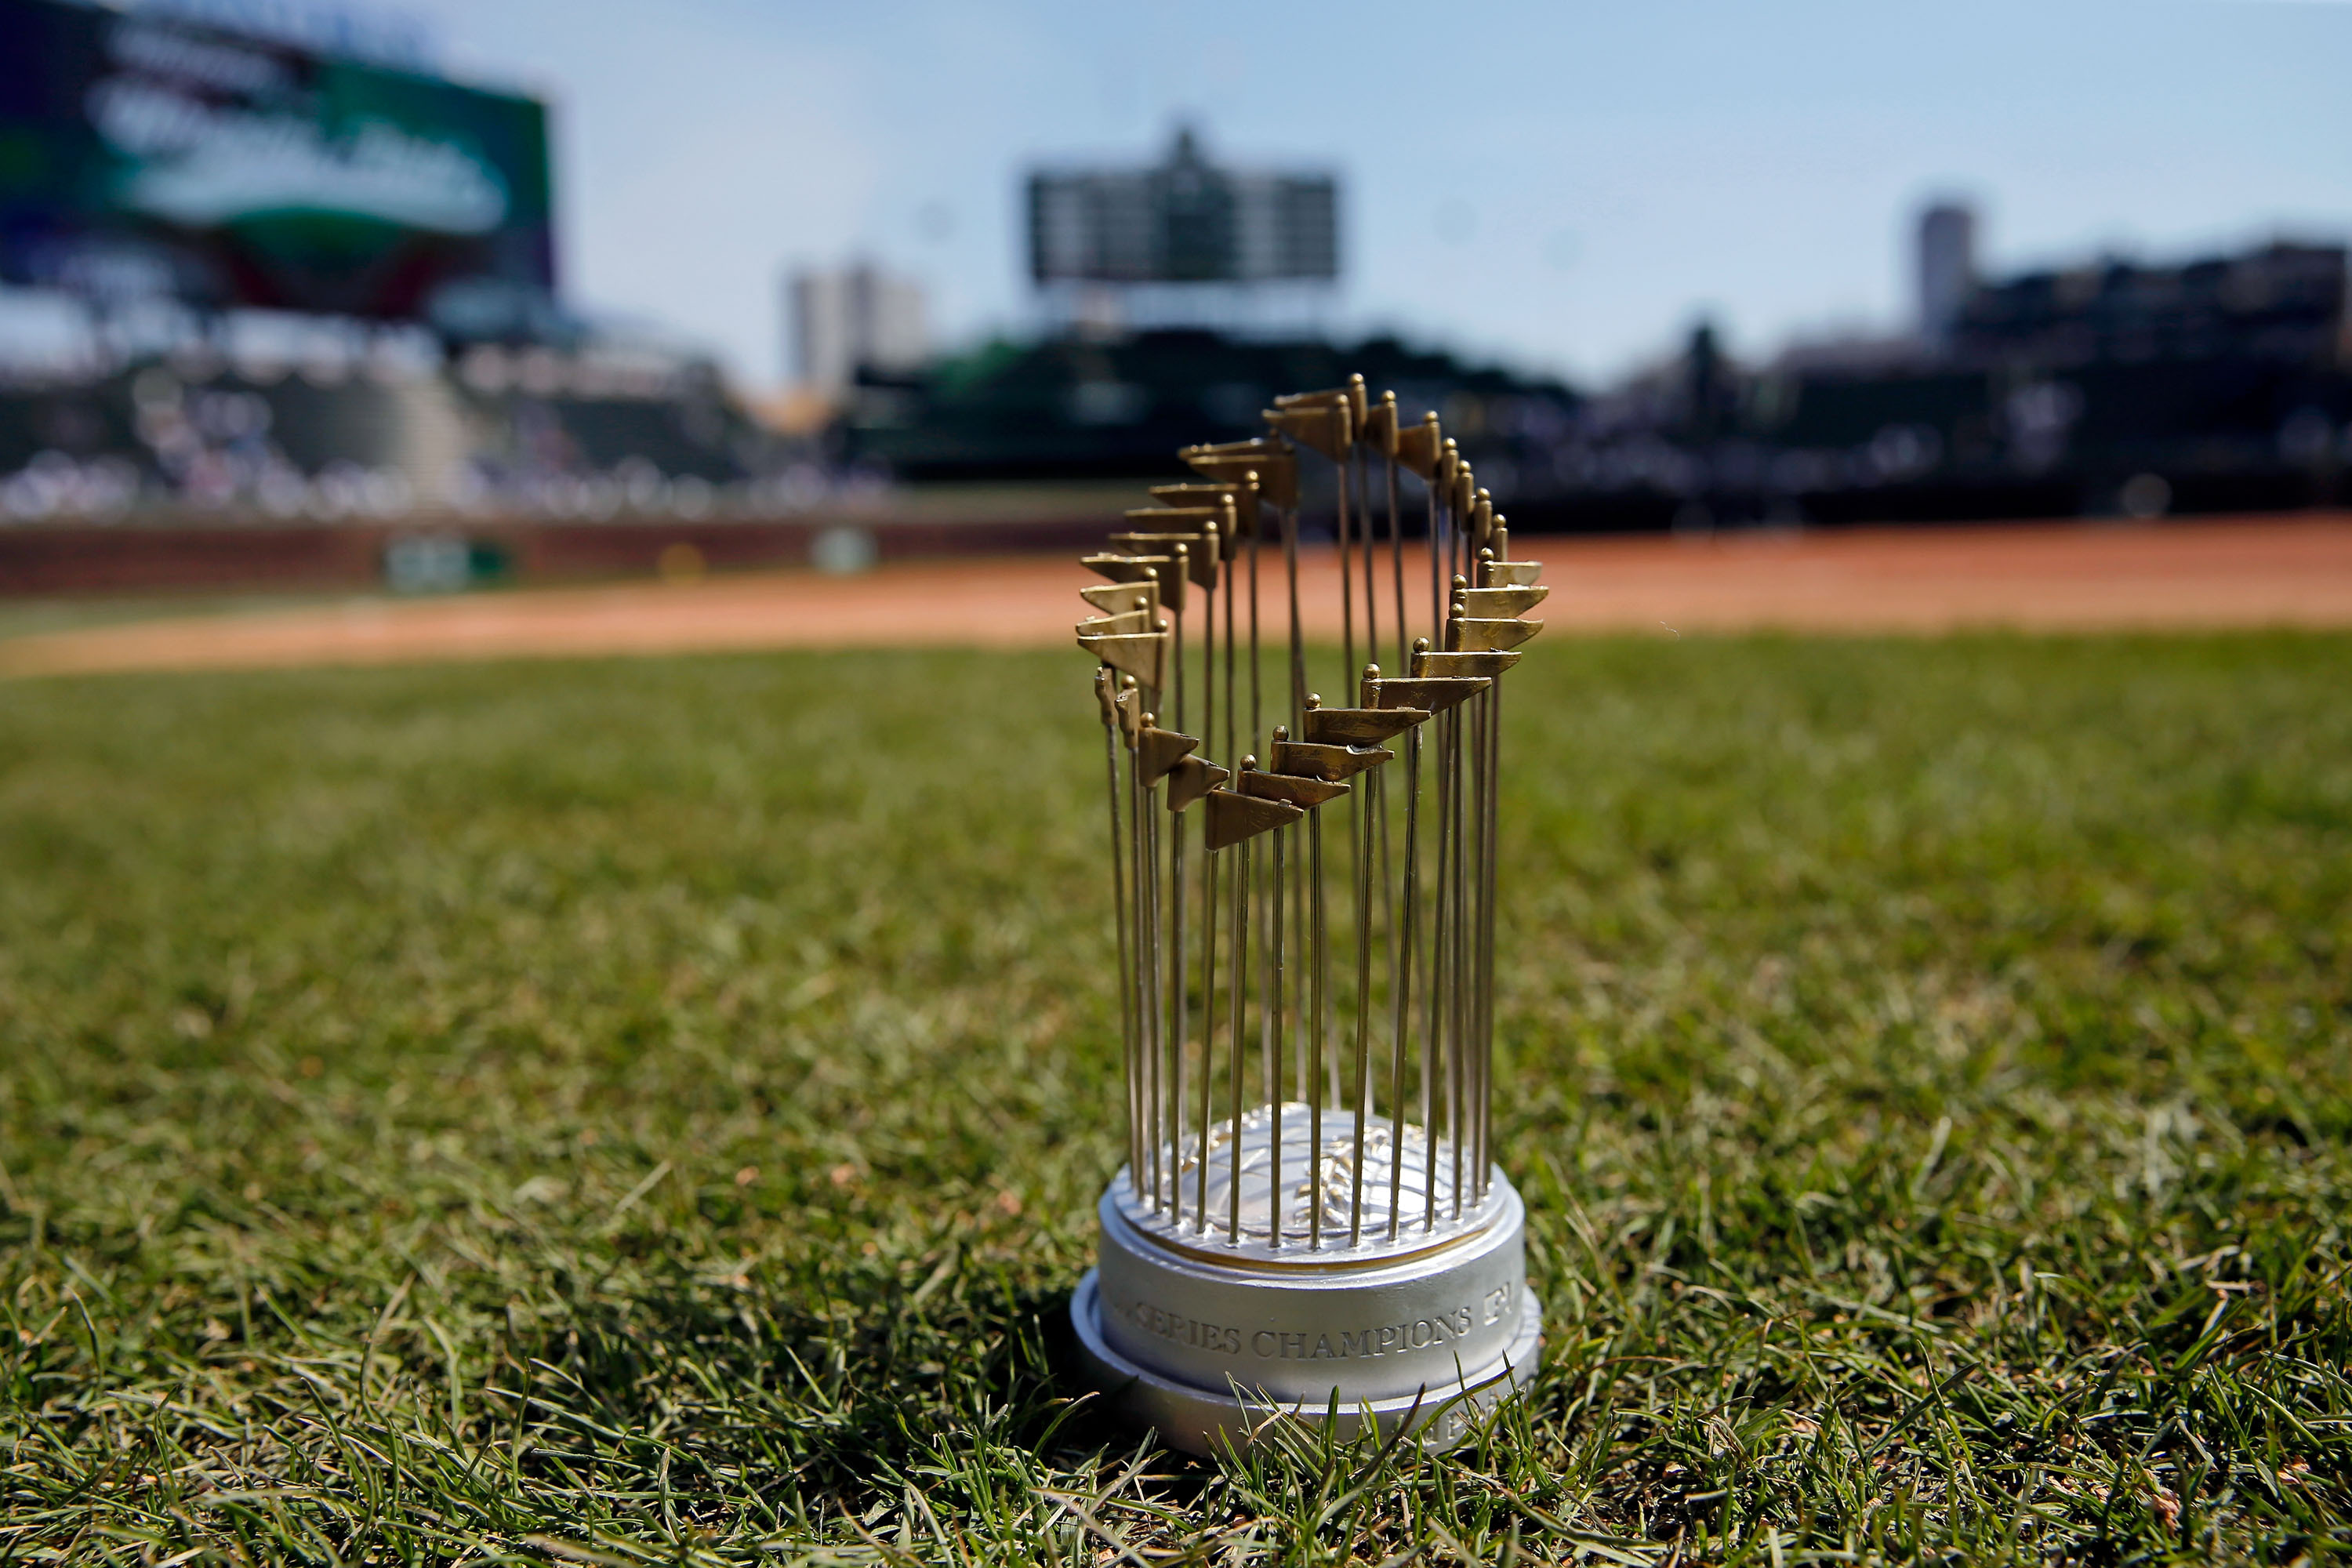 Cubs World Series trophy: The hardware compared and how much it's